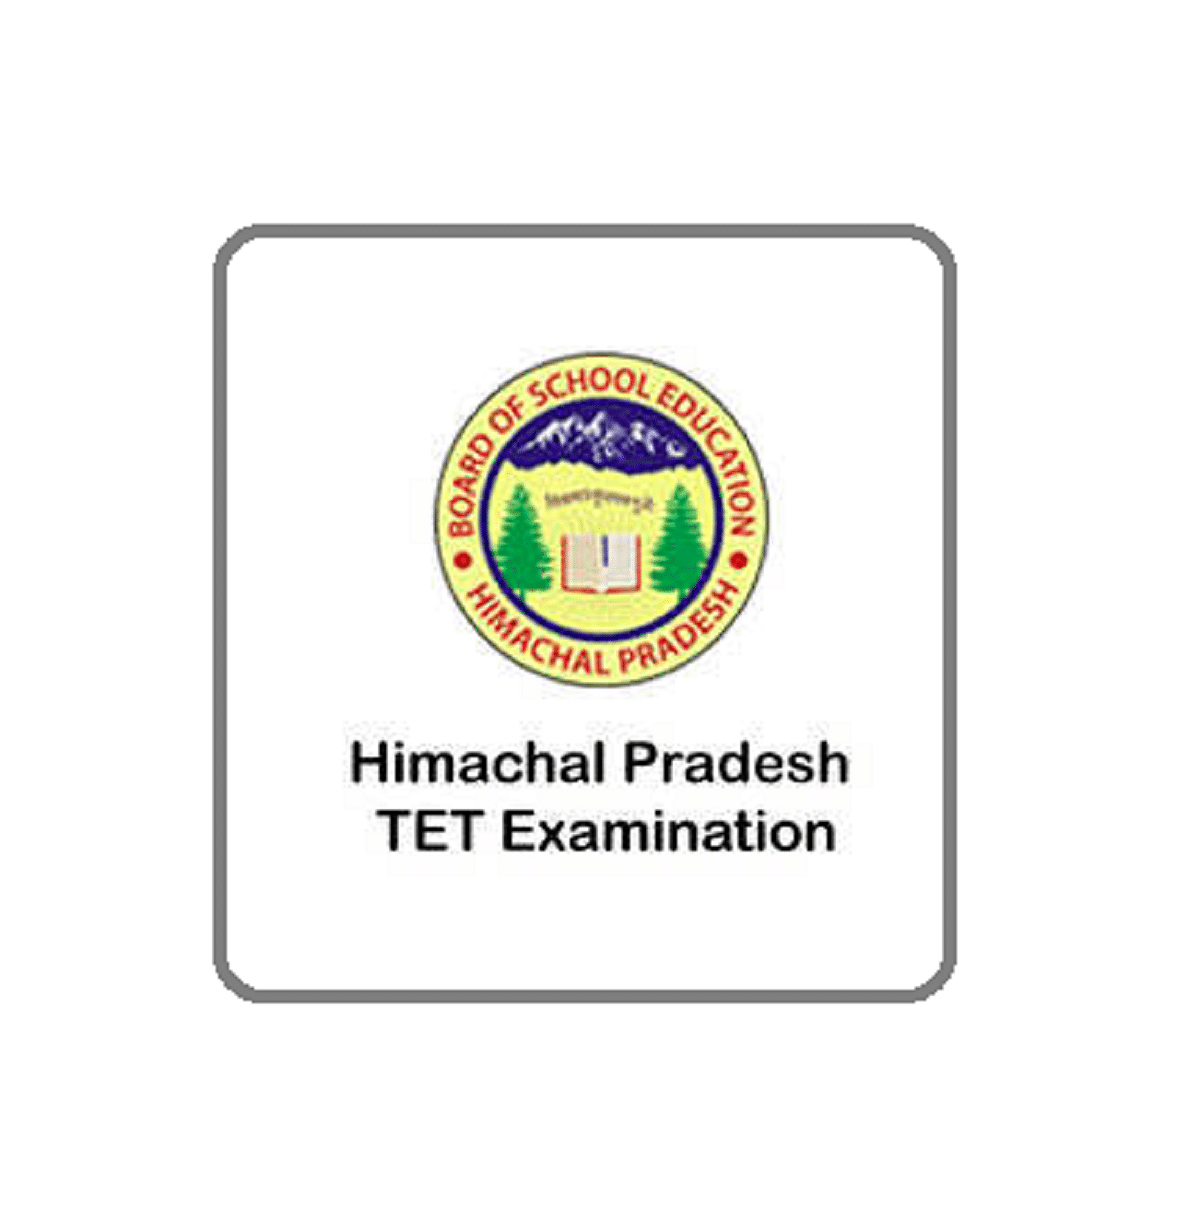 HP TET 2020 Form Correction Facility Ends Today, Check Important Details